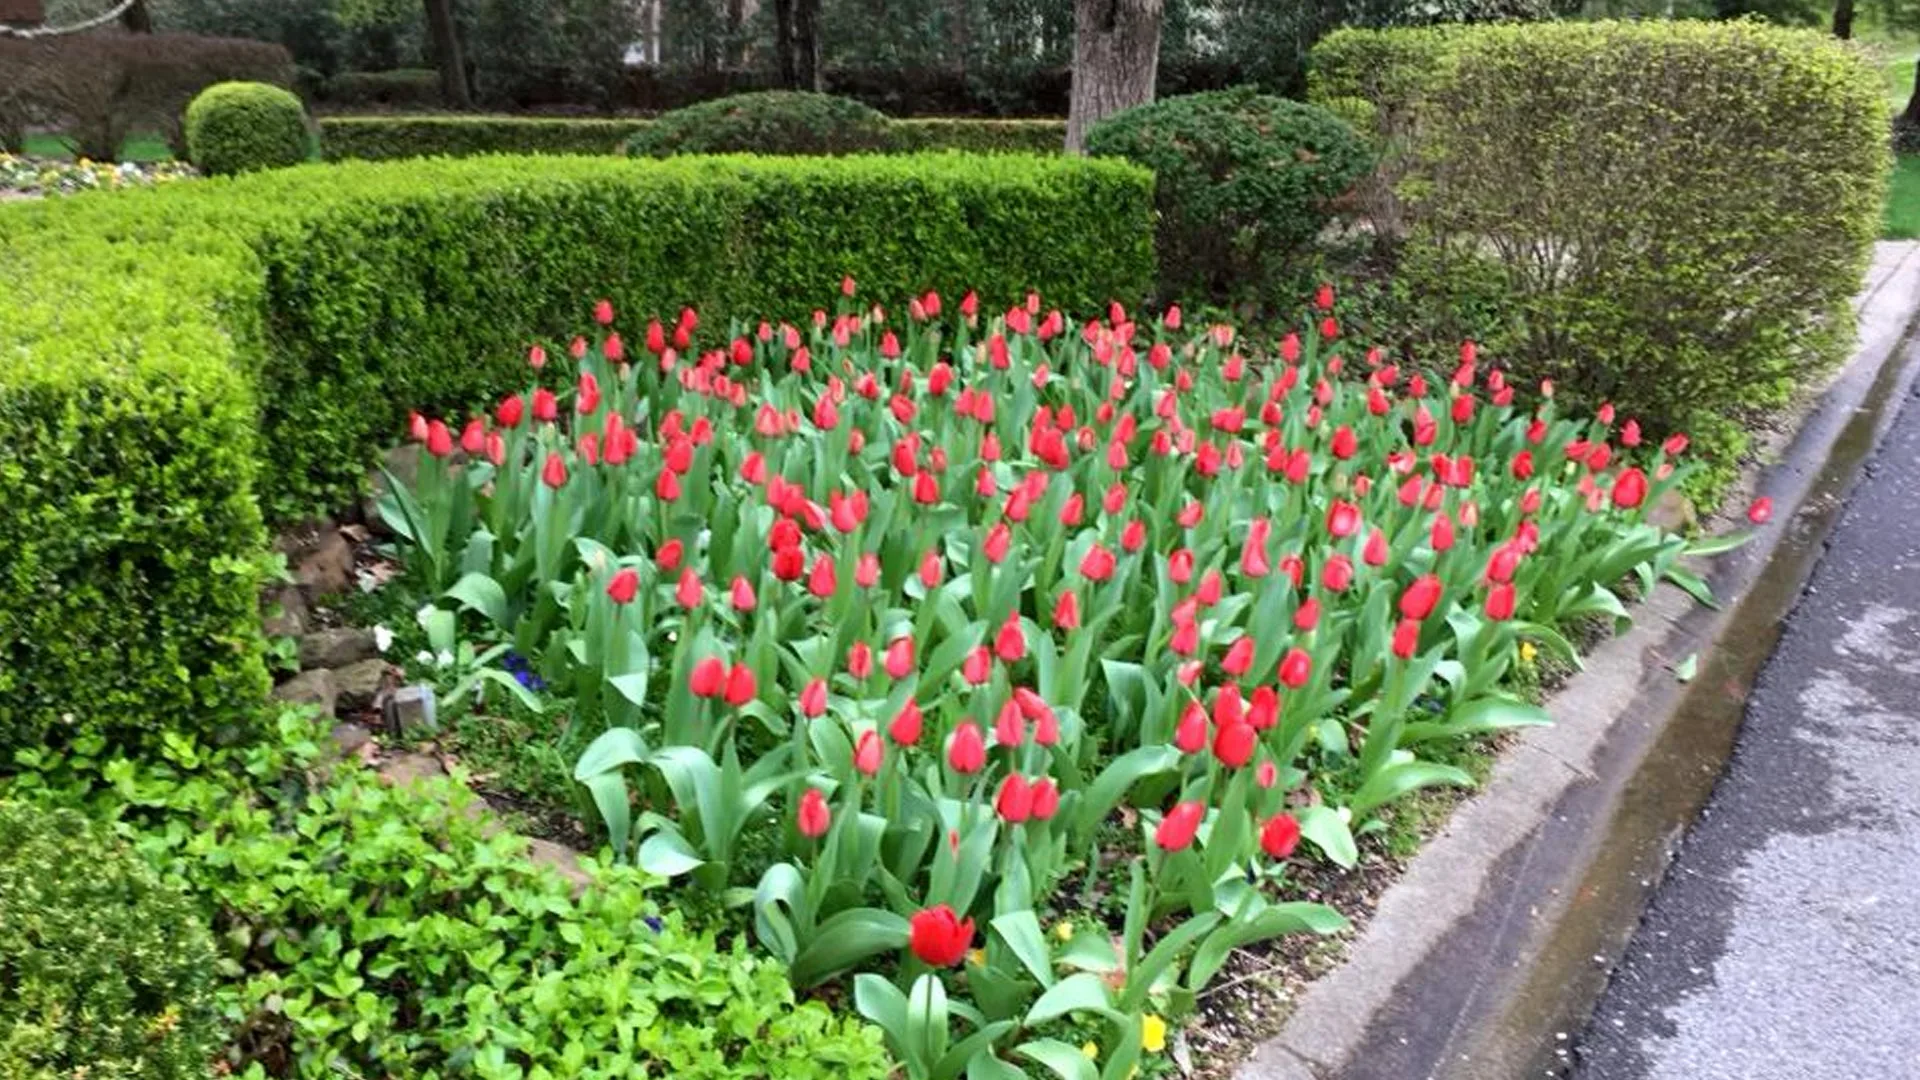 Landscaping that was recently planted with fully bloomed tulips in Mayfield, KY.